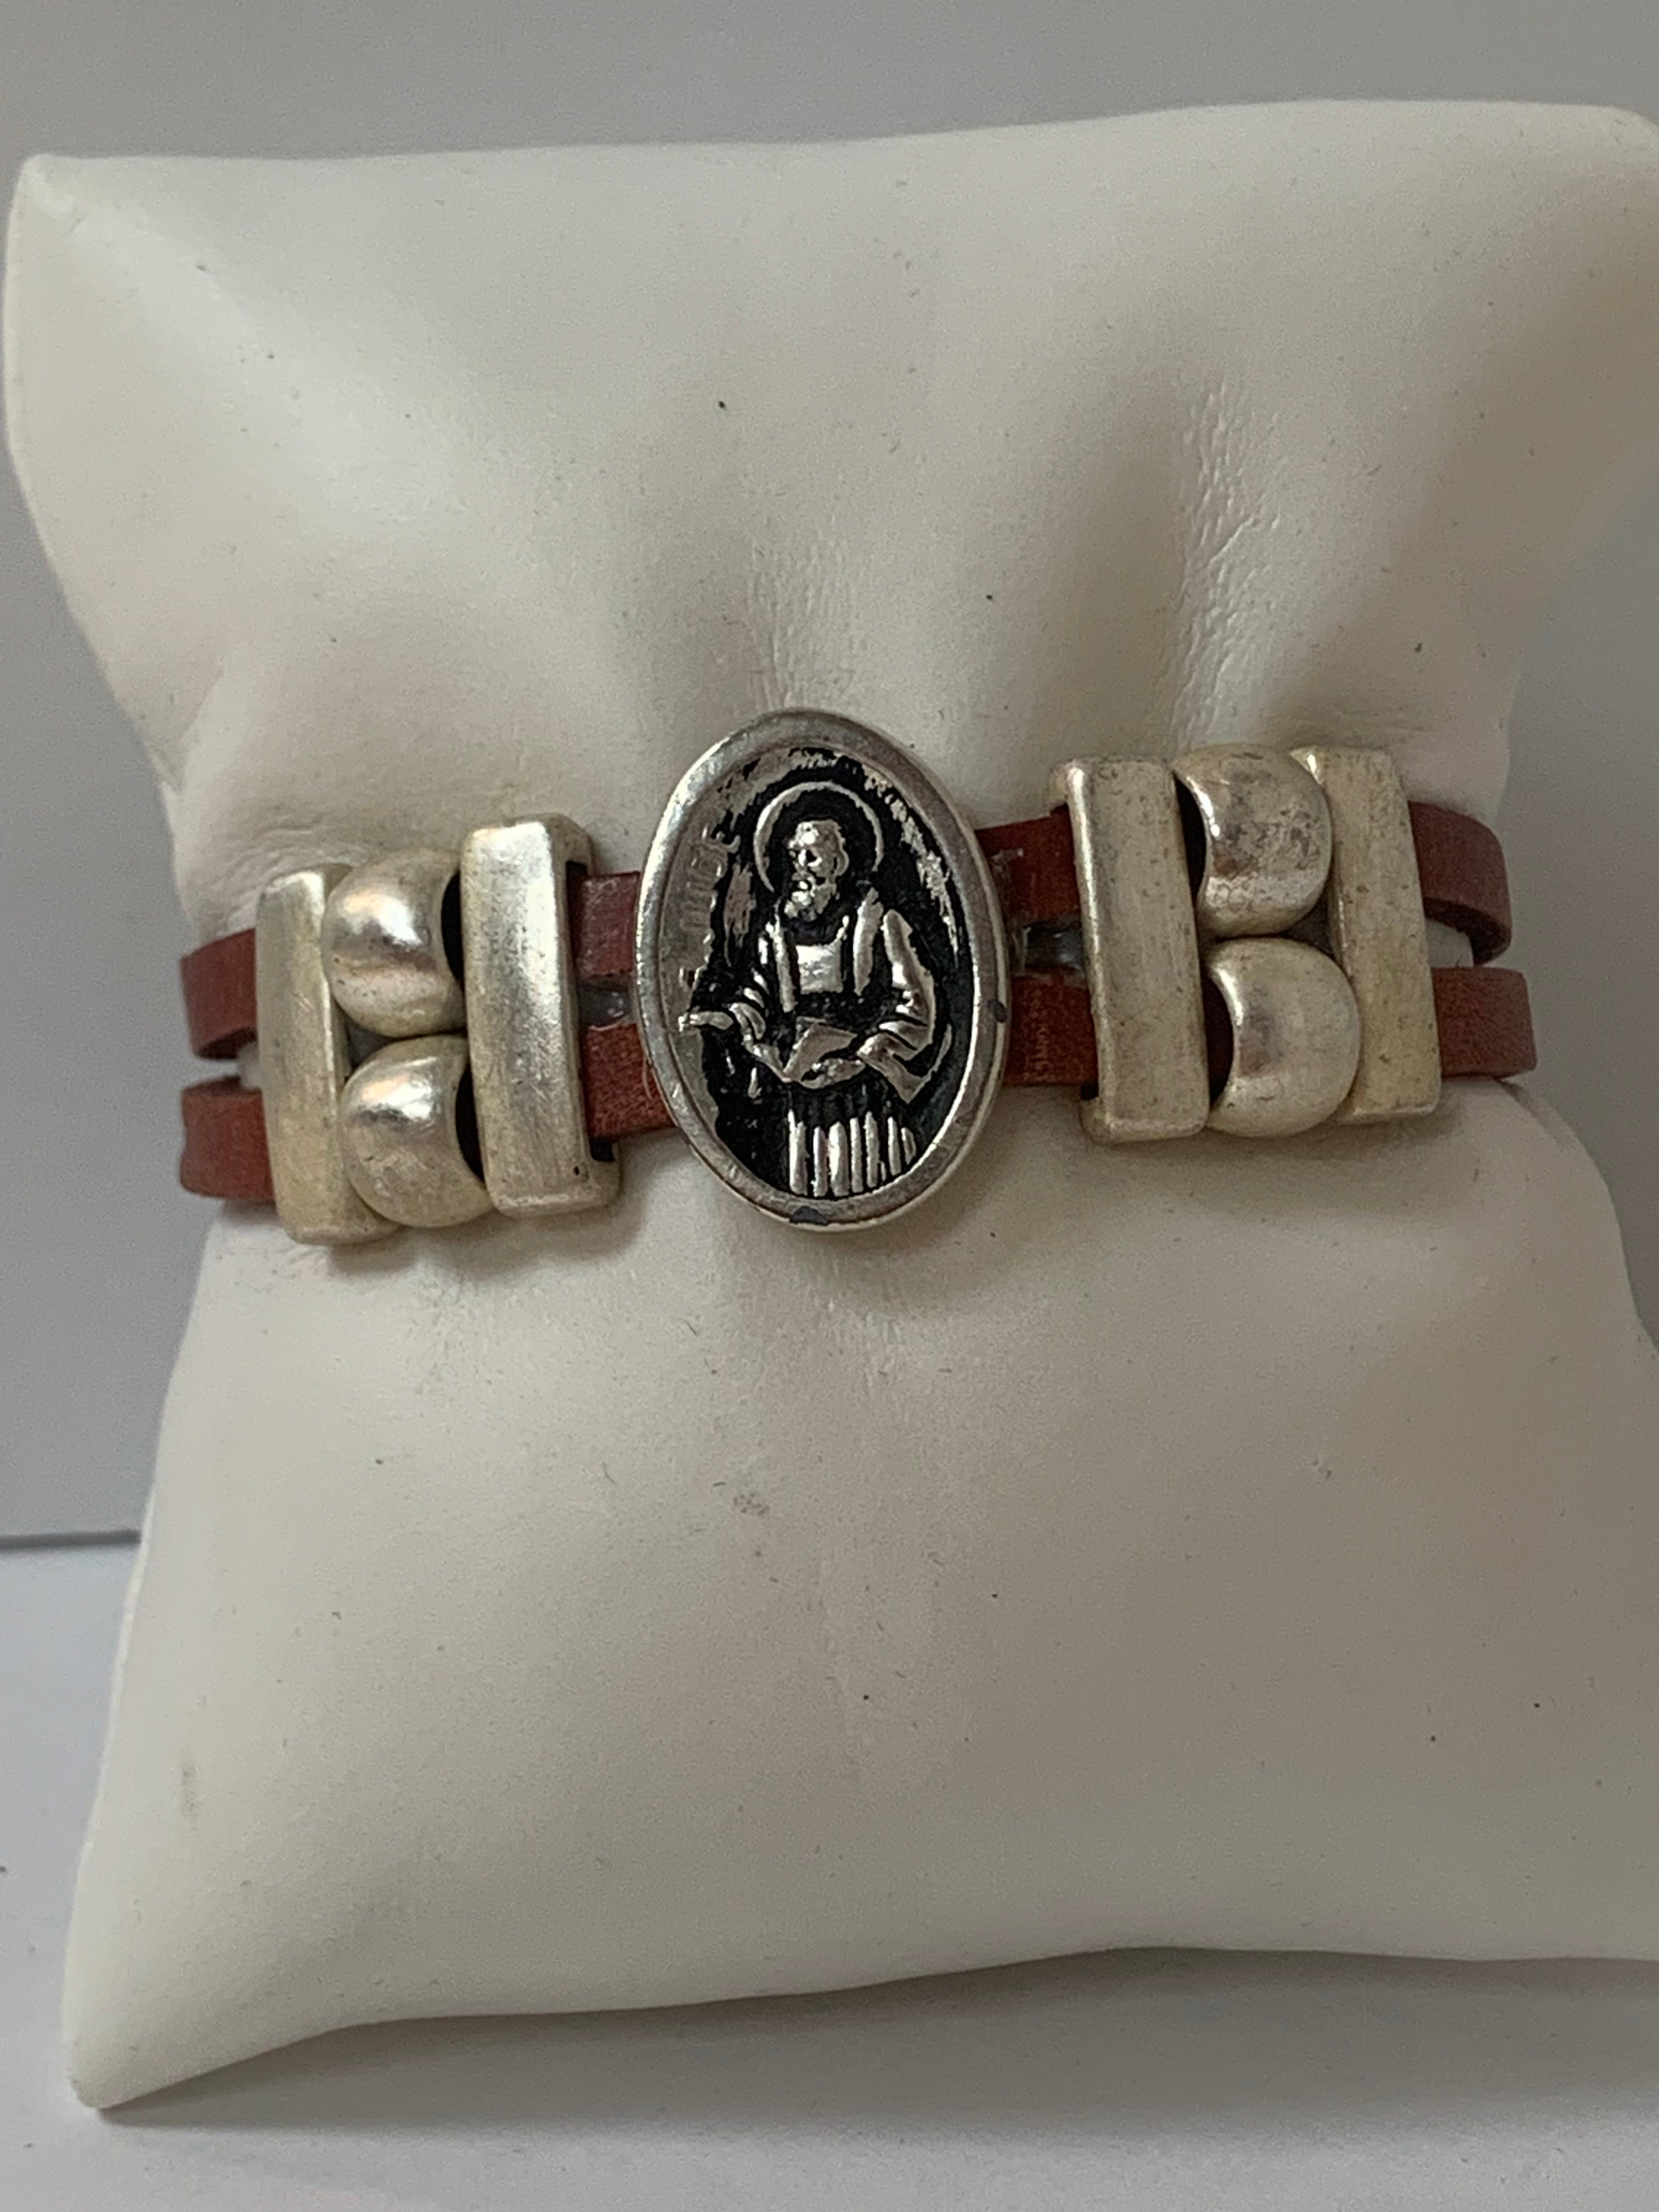 Bracelet of Saint Jude Medal handmade jewelry with Double Leather Straps by Graciela's Collection